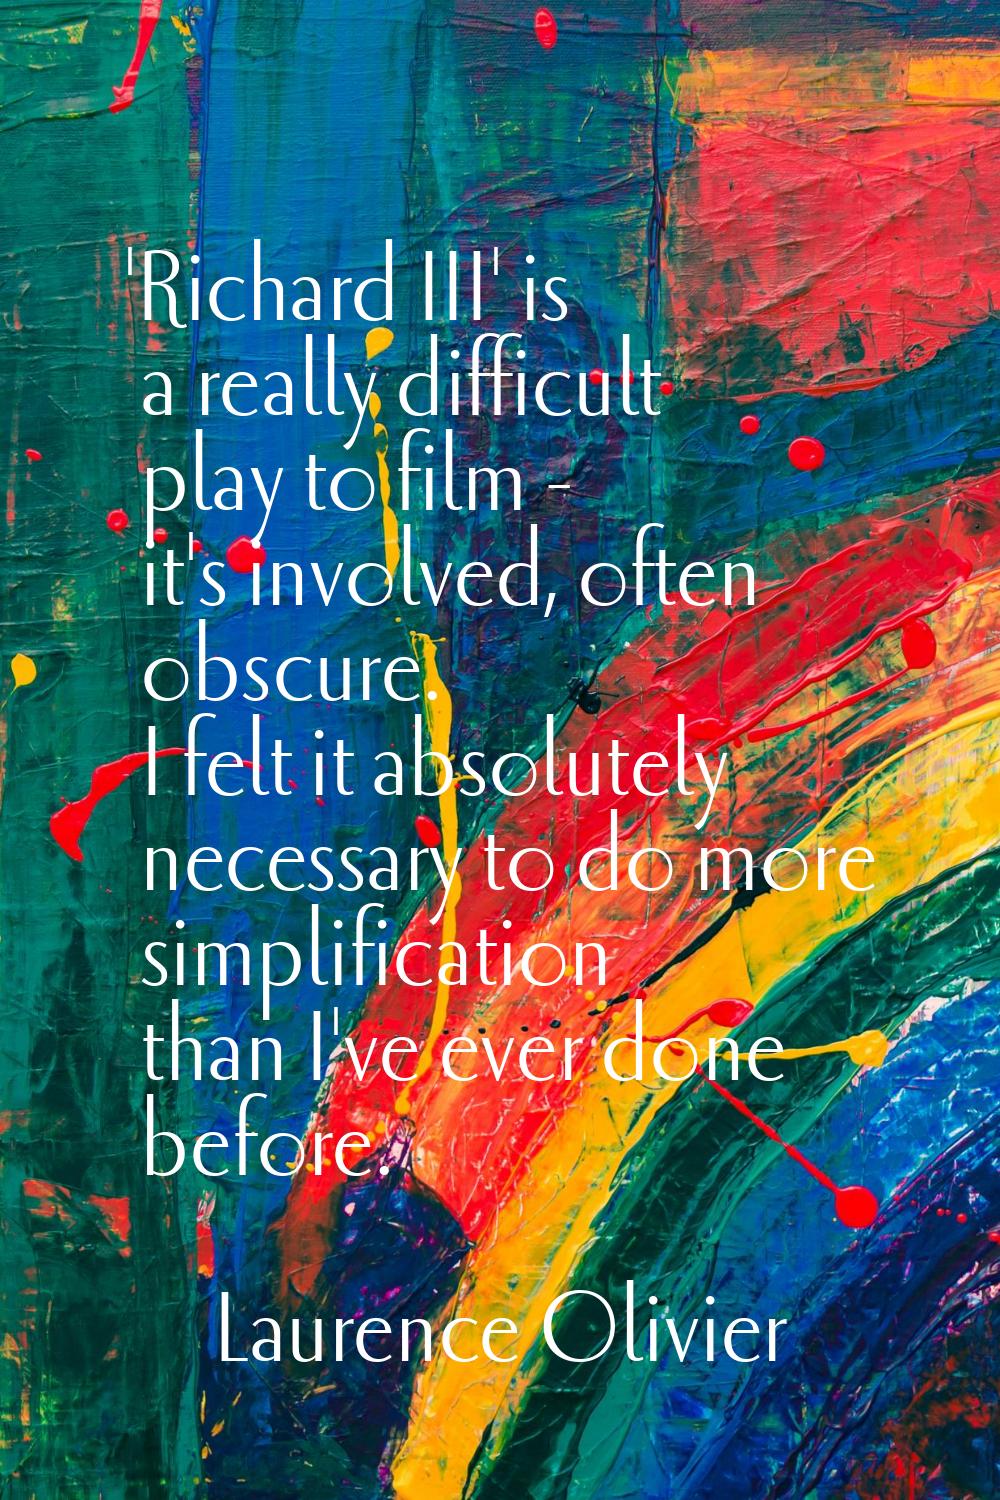 'Richard III' is a really difficult play to film - it's involved, often obscure. I felt it absolute